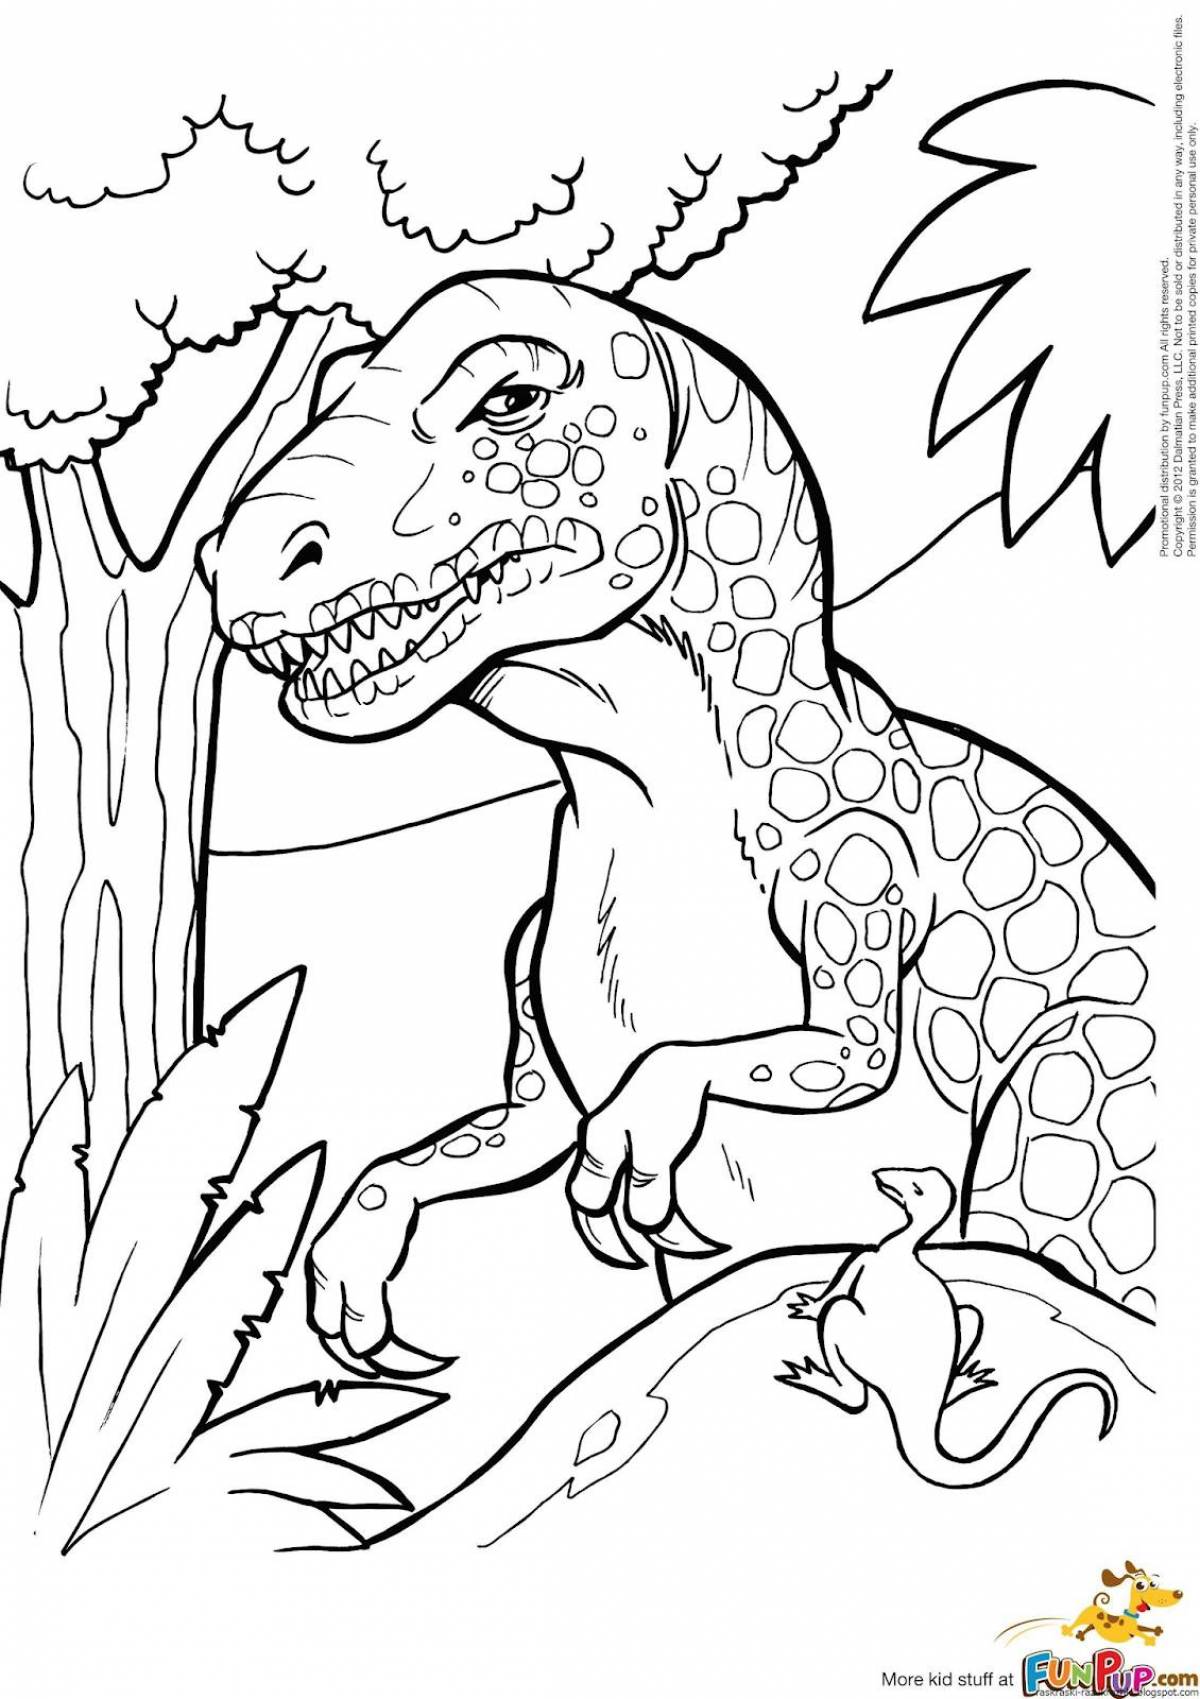 Creative dinosaurs coloring book for 5-6 year olds